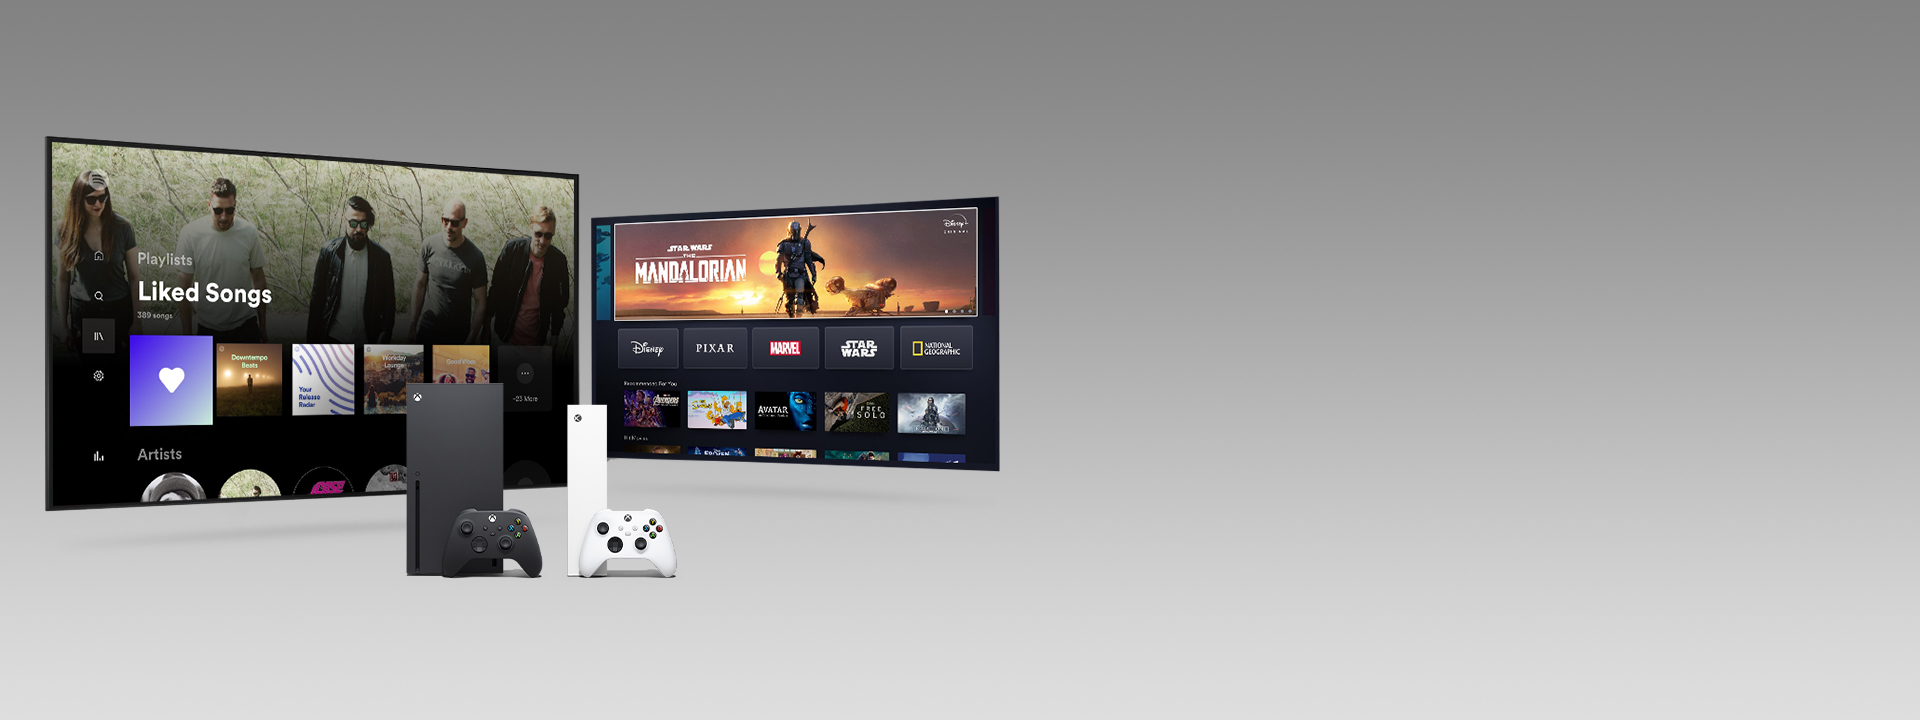 An Xbox Series X and Series S with controllers in front of two television screens featuring app user interfaces.